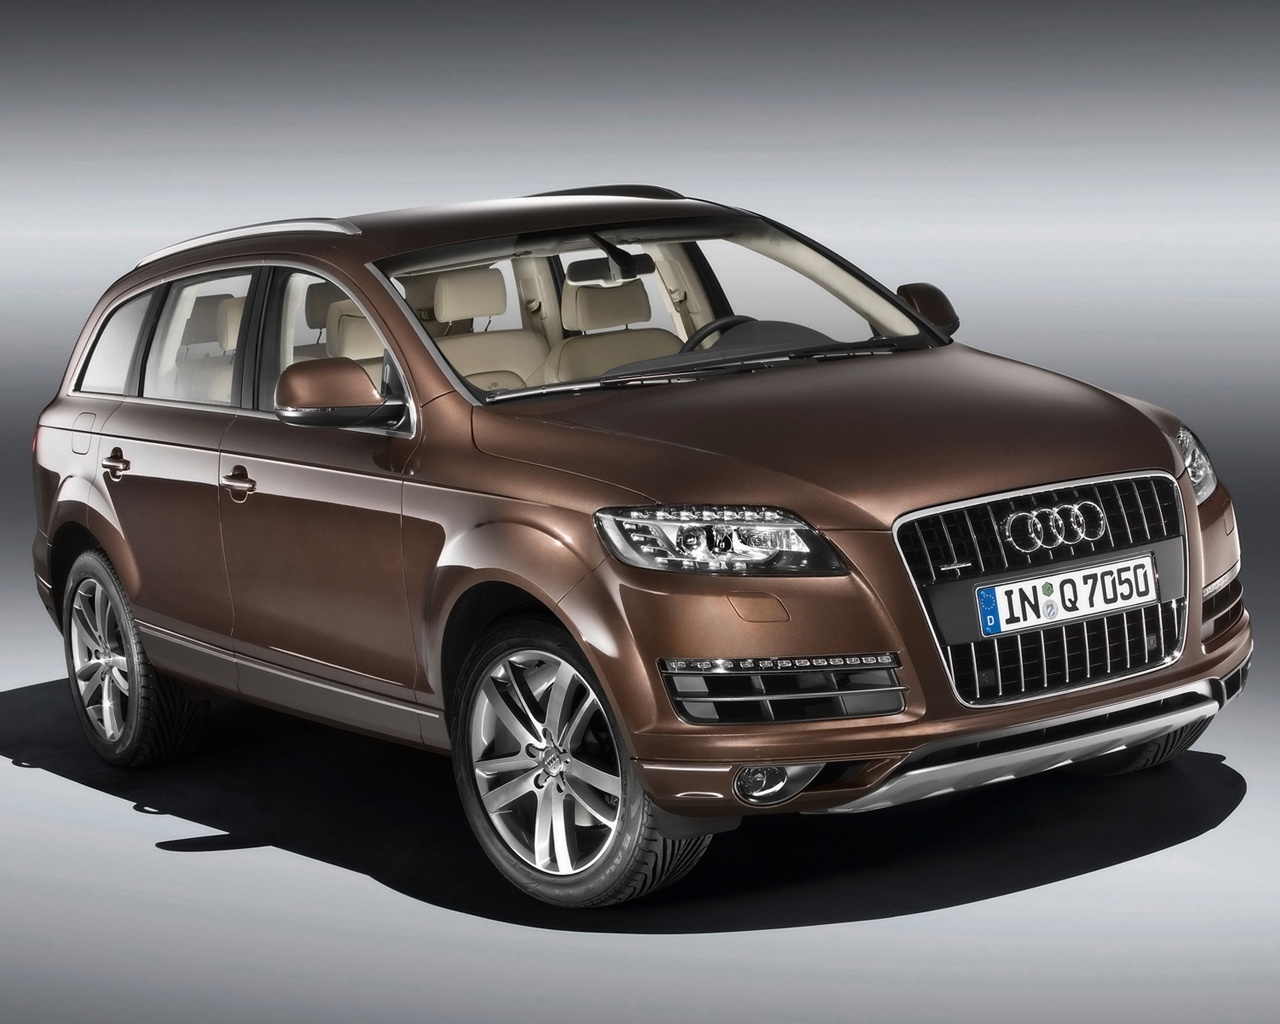 2009 Audi Q7 - Studio Front Angle for 1280 x 1024 resolution